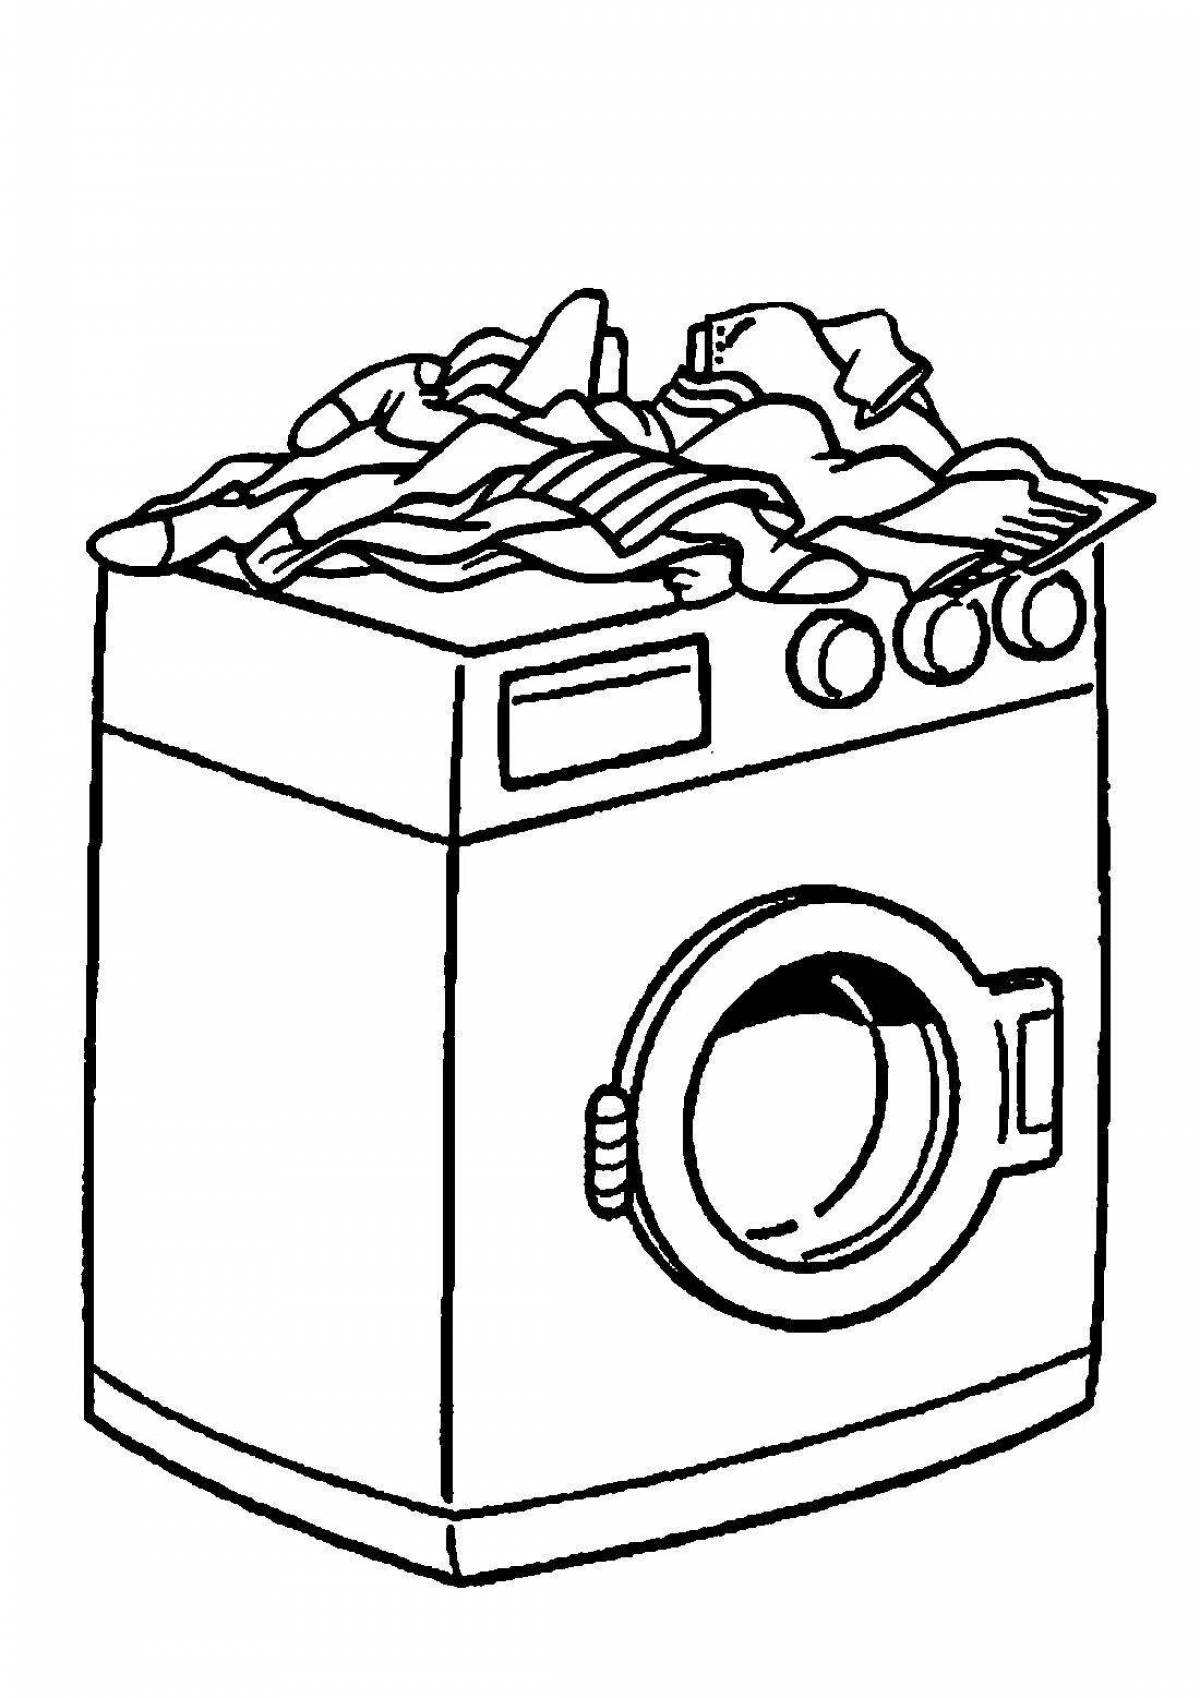 Radiant washer coloring book